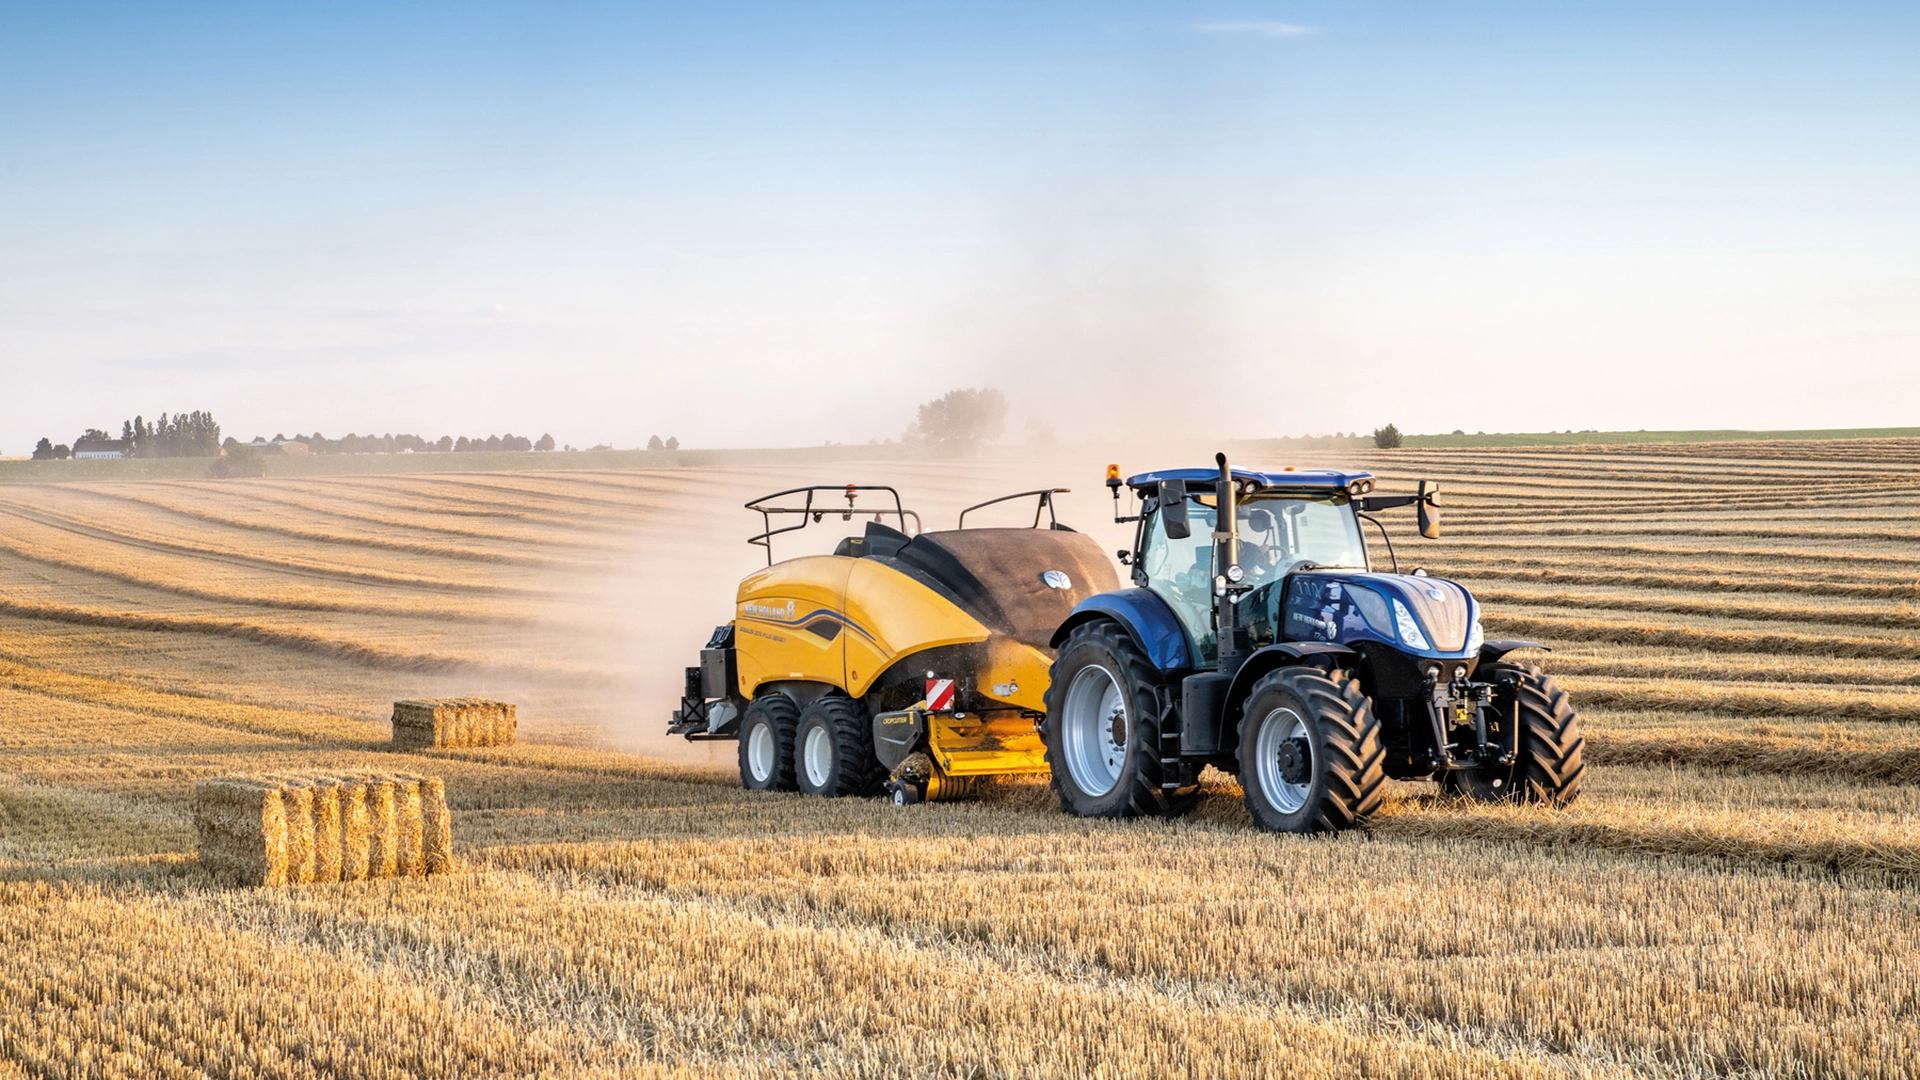 Tractor in action, operating a Bigbaler Plus Square Baler on an expansive agricultural field